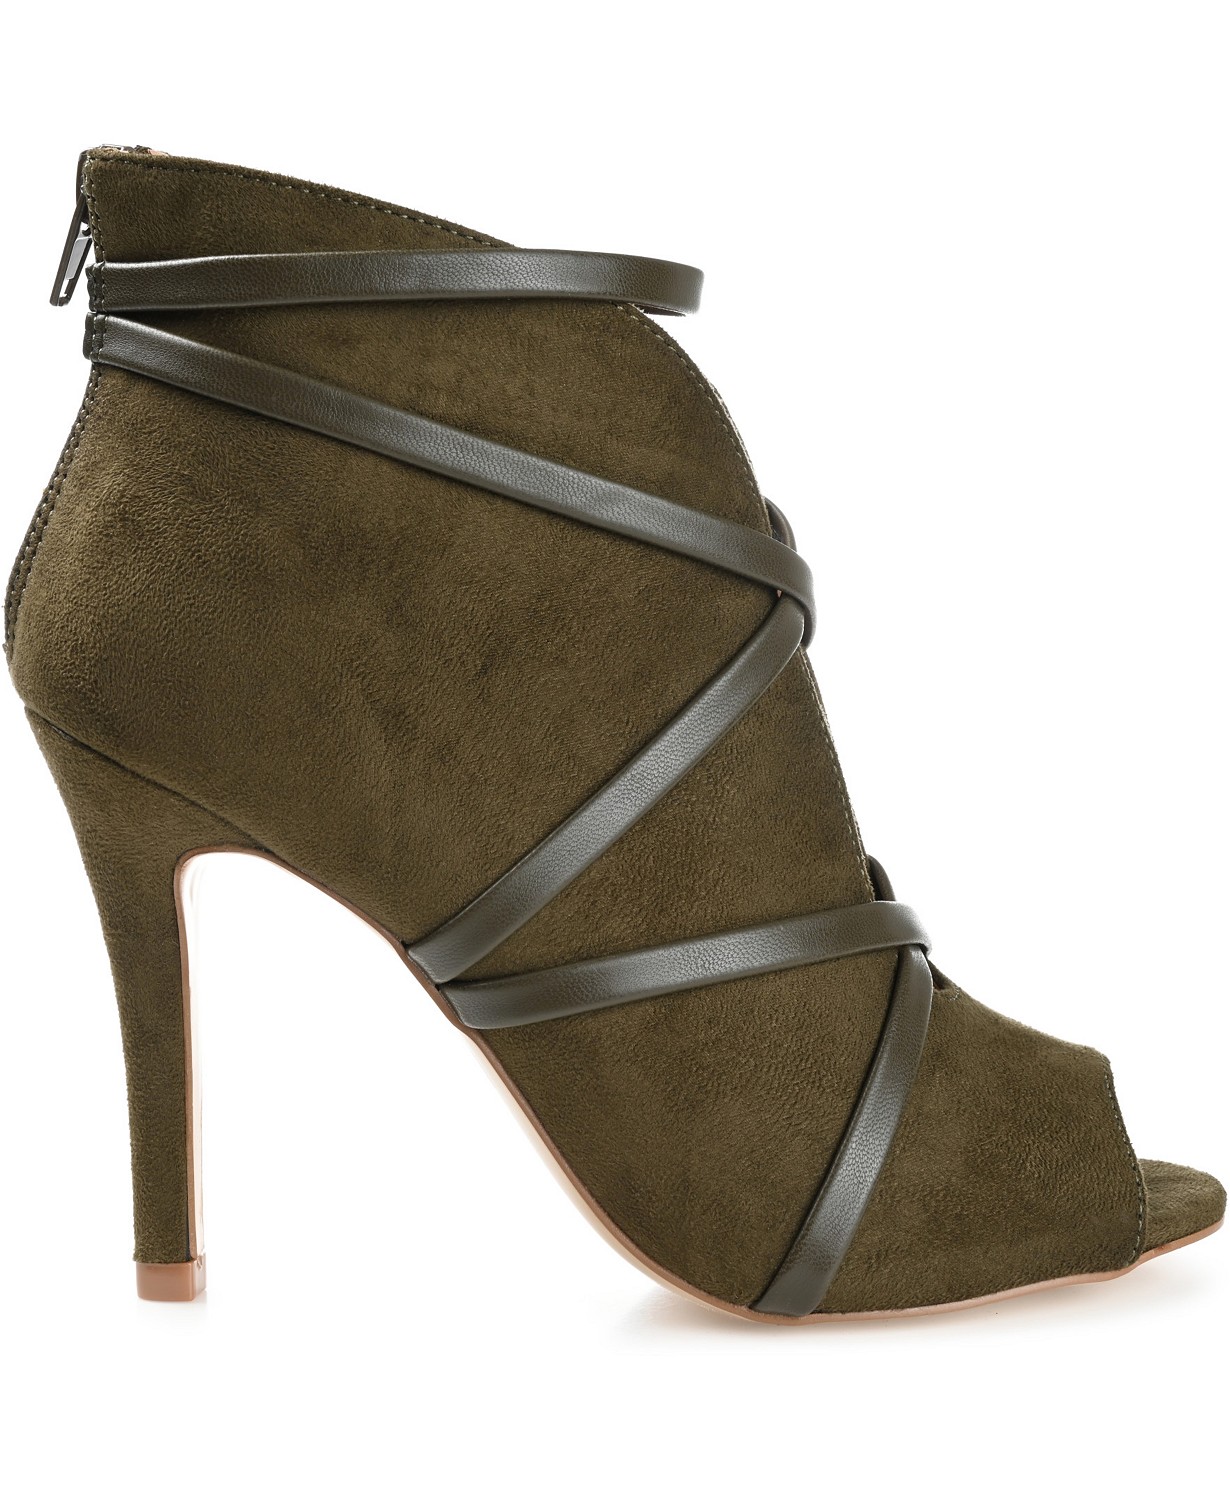 www.couturepoint.com-zodiac-womens-brown-leather-gemma-lace-up-heeled-combat-booties-copy